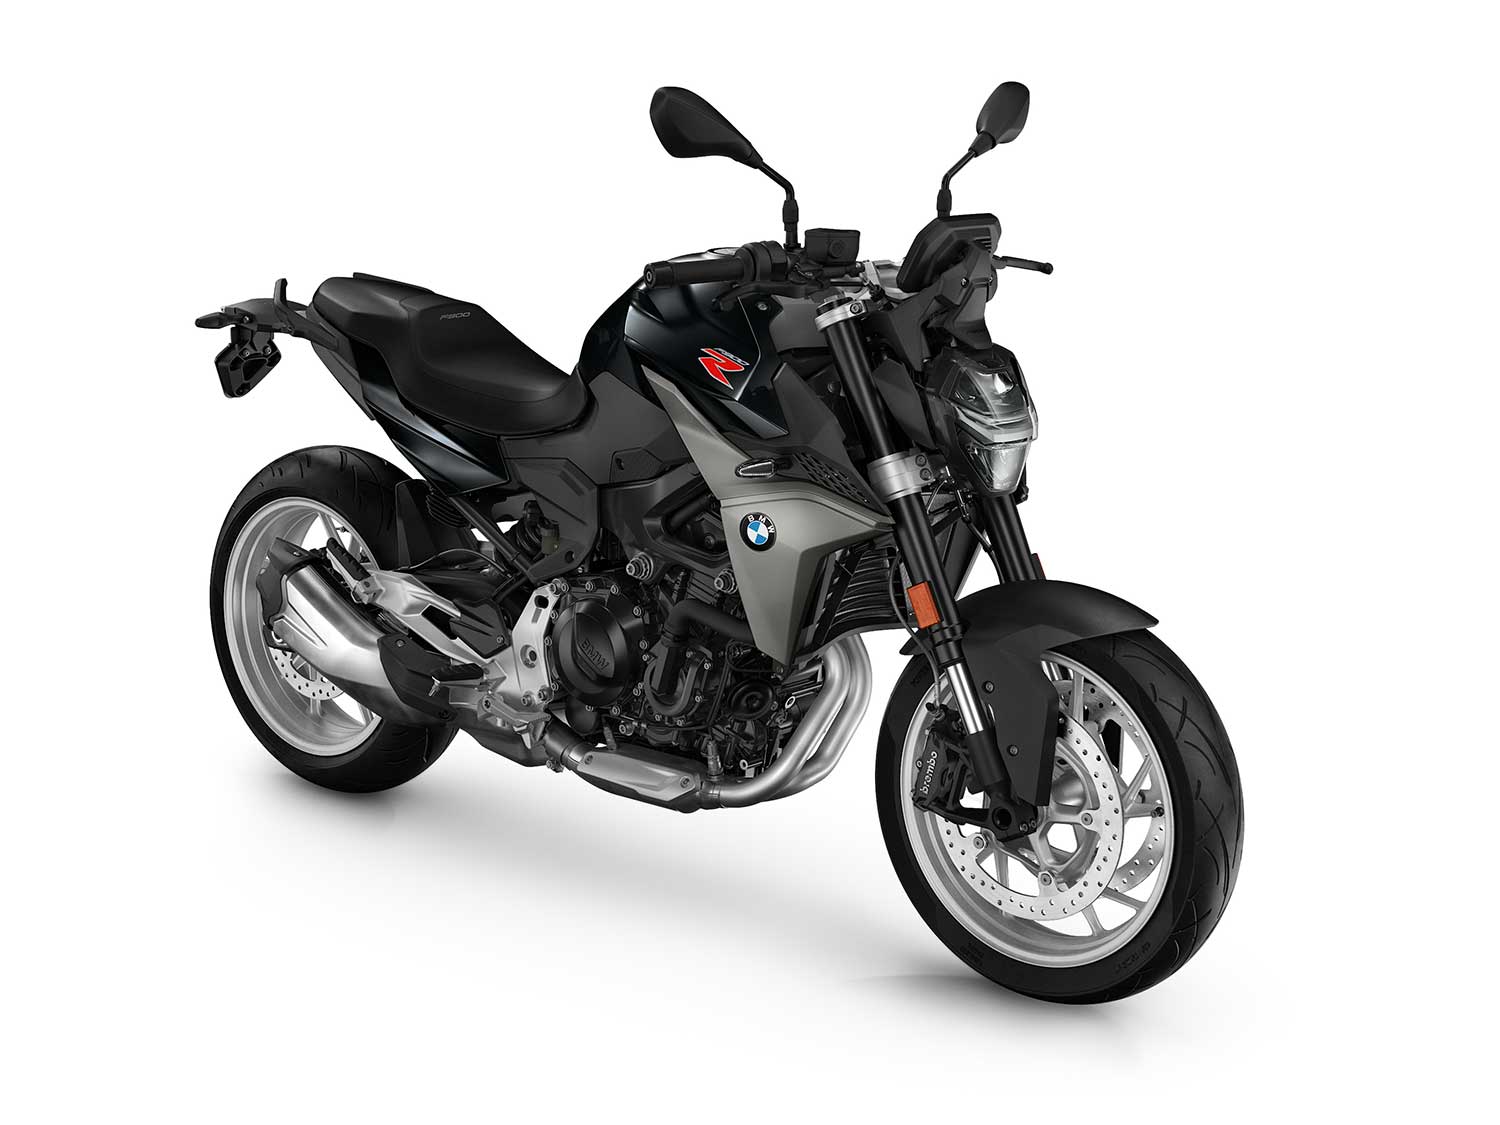 2020 BMW F 900 R Buyer's Guide: Specs, Photos, Price